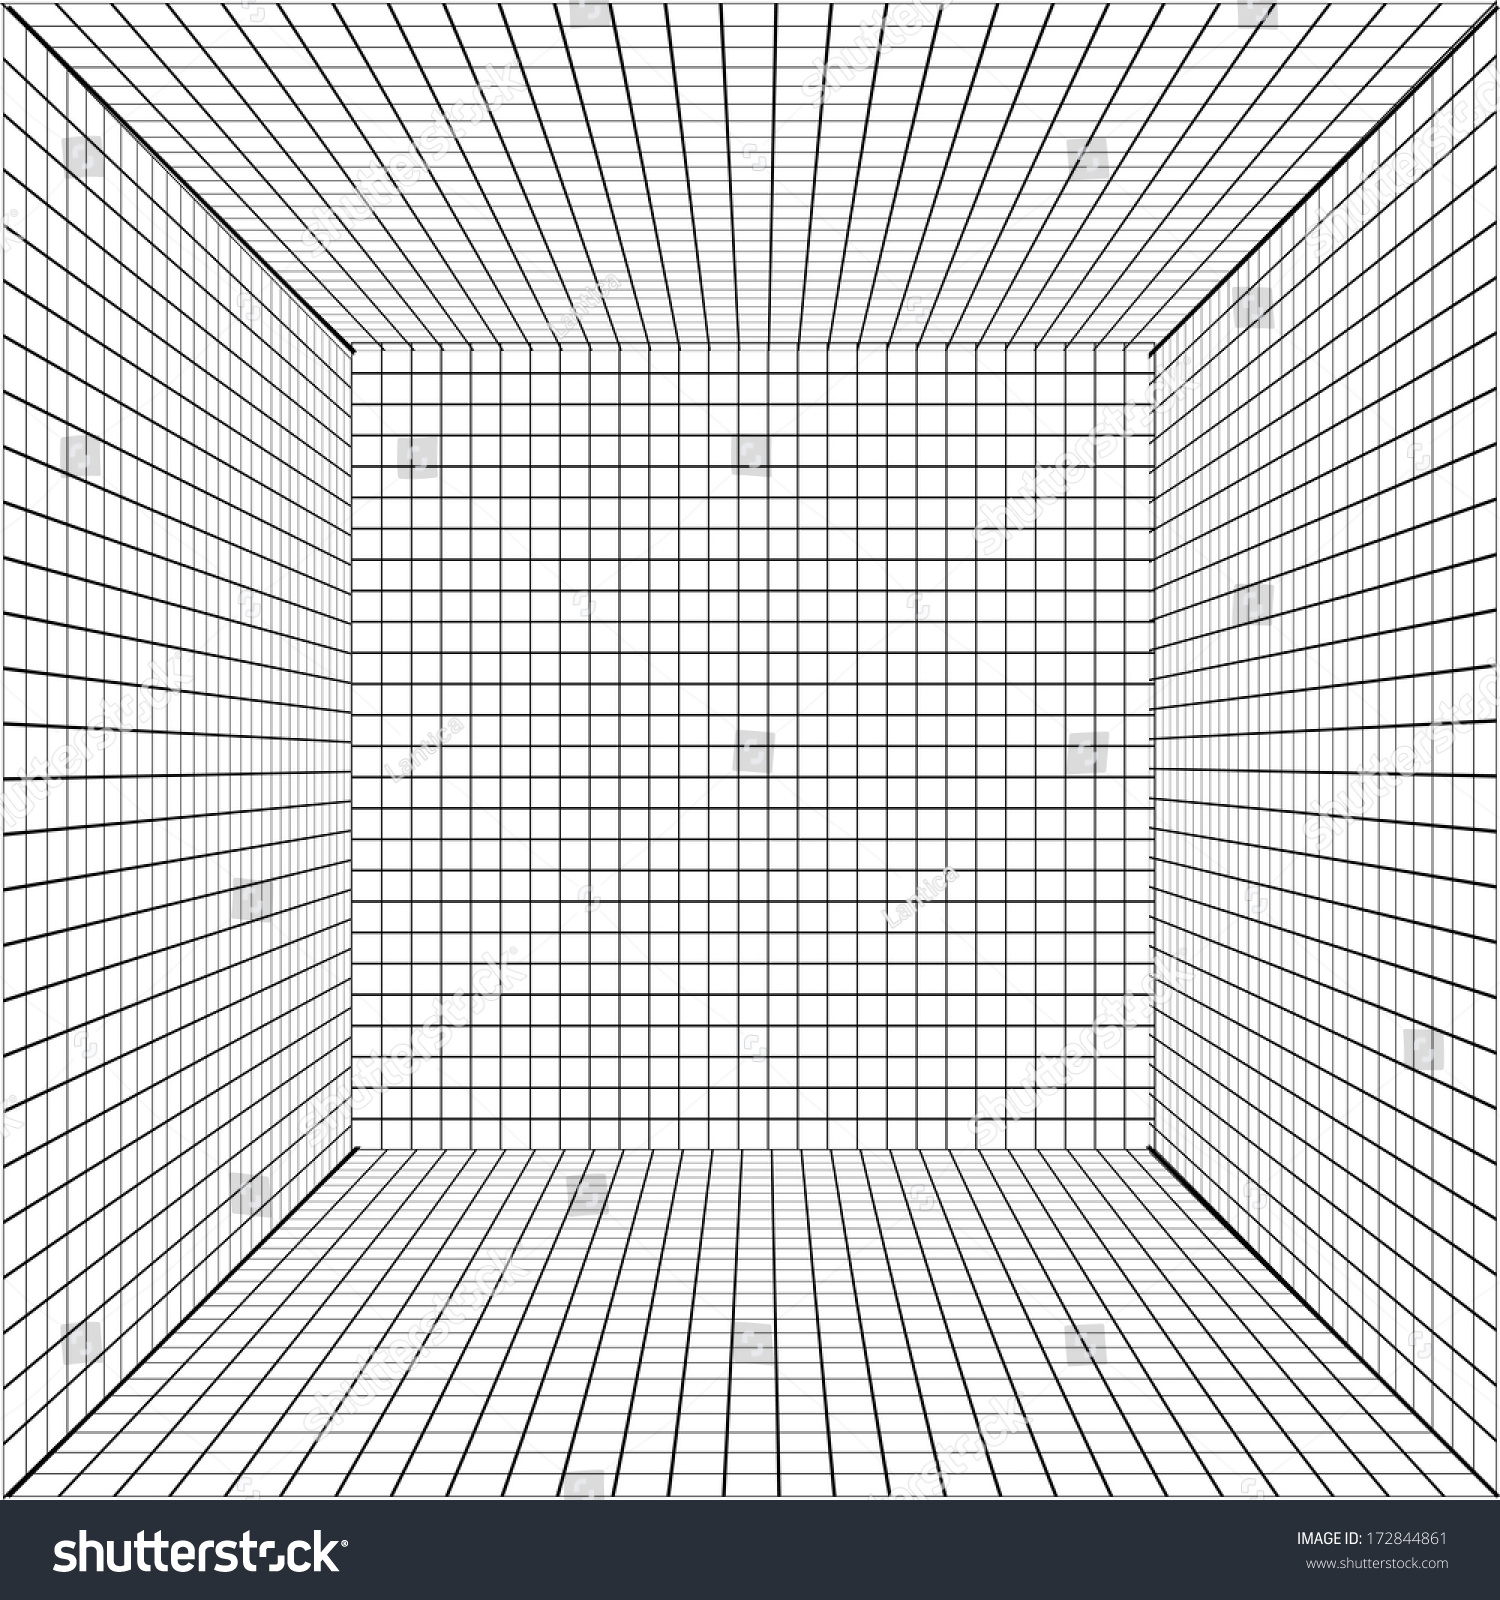 Vector Background With A Perspective Grid. - 172844861 : Shutterstock